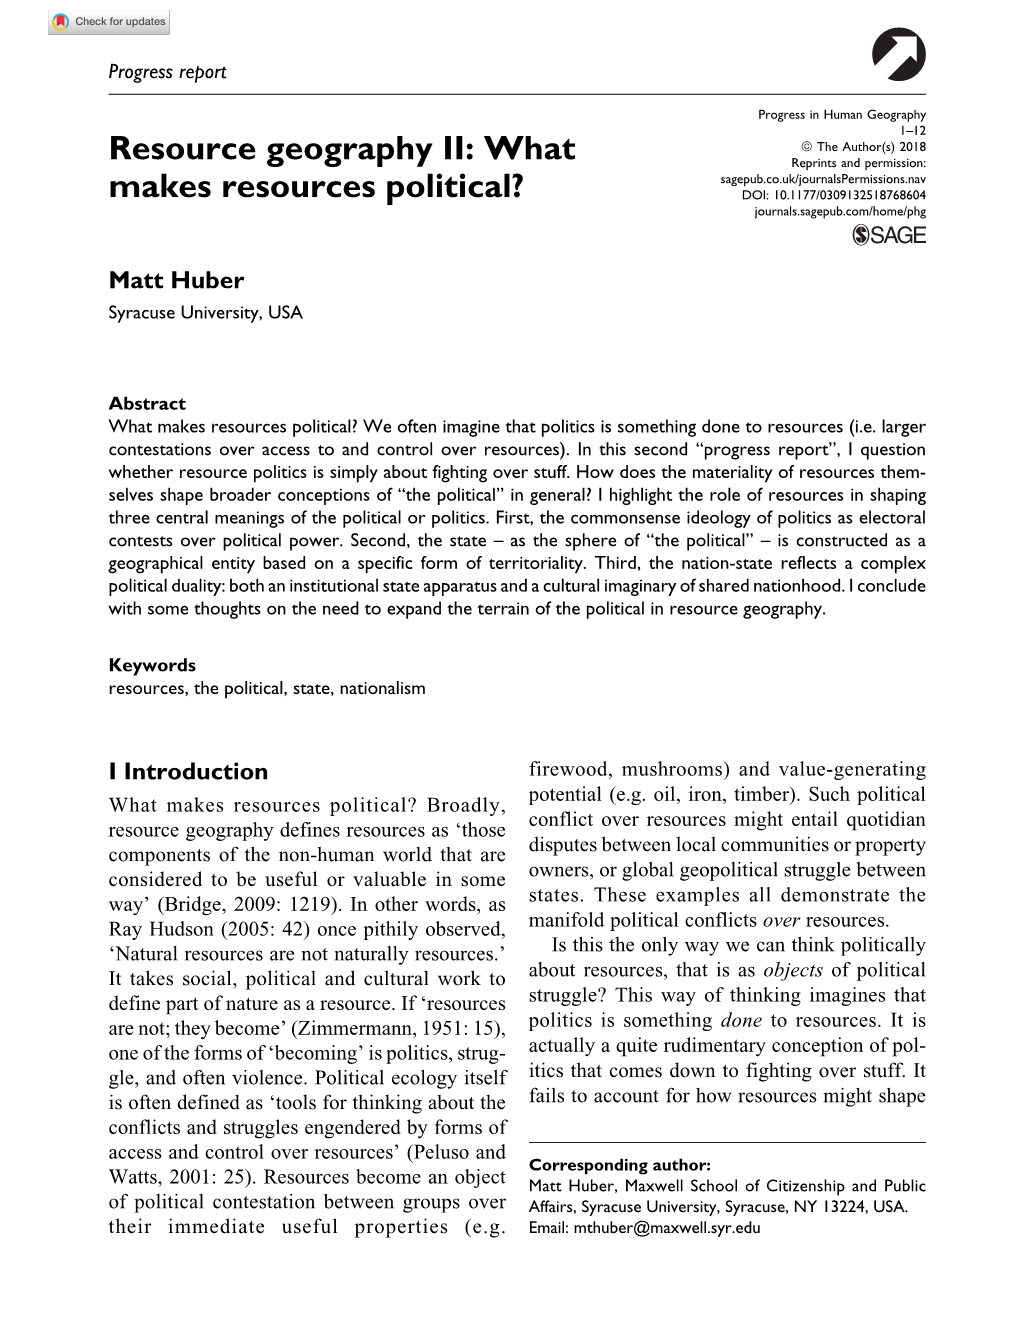 Resource Geography II: What Makes Resources Political?